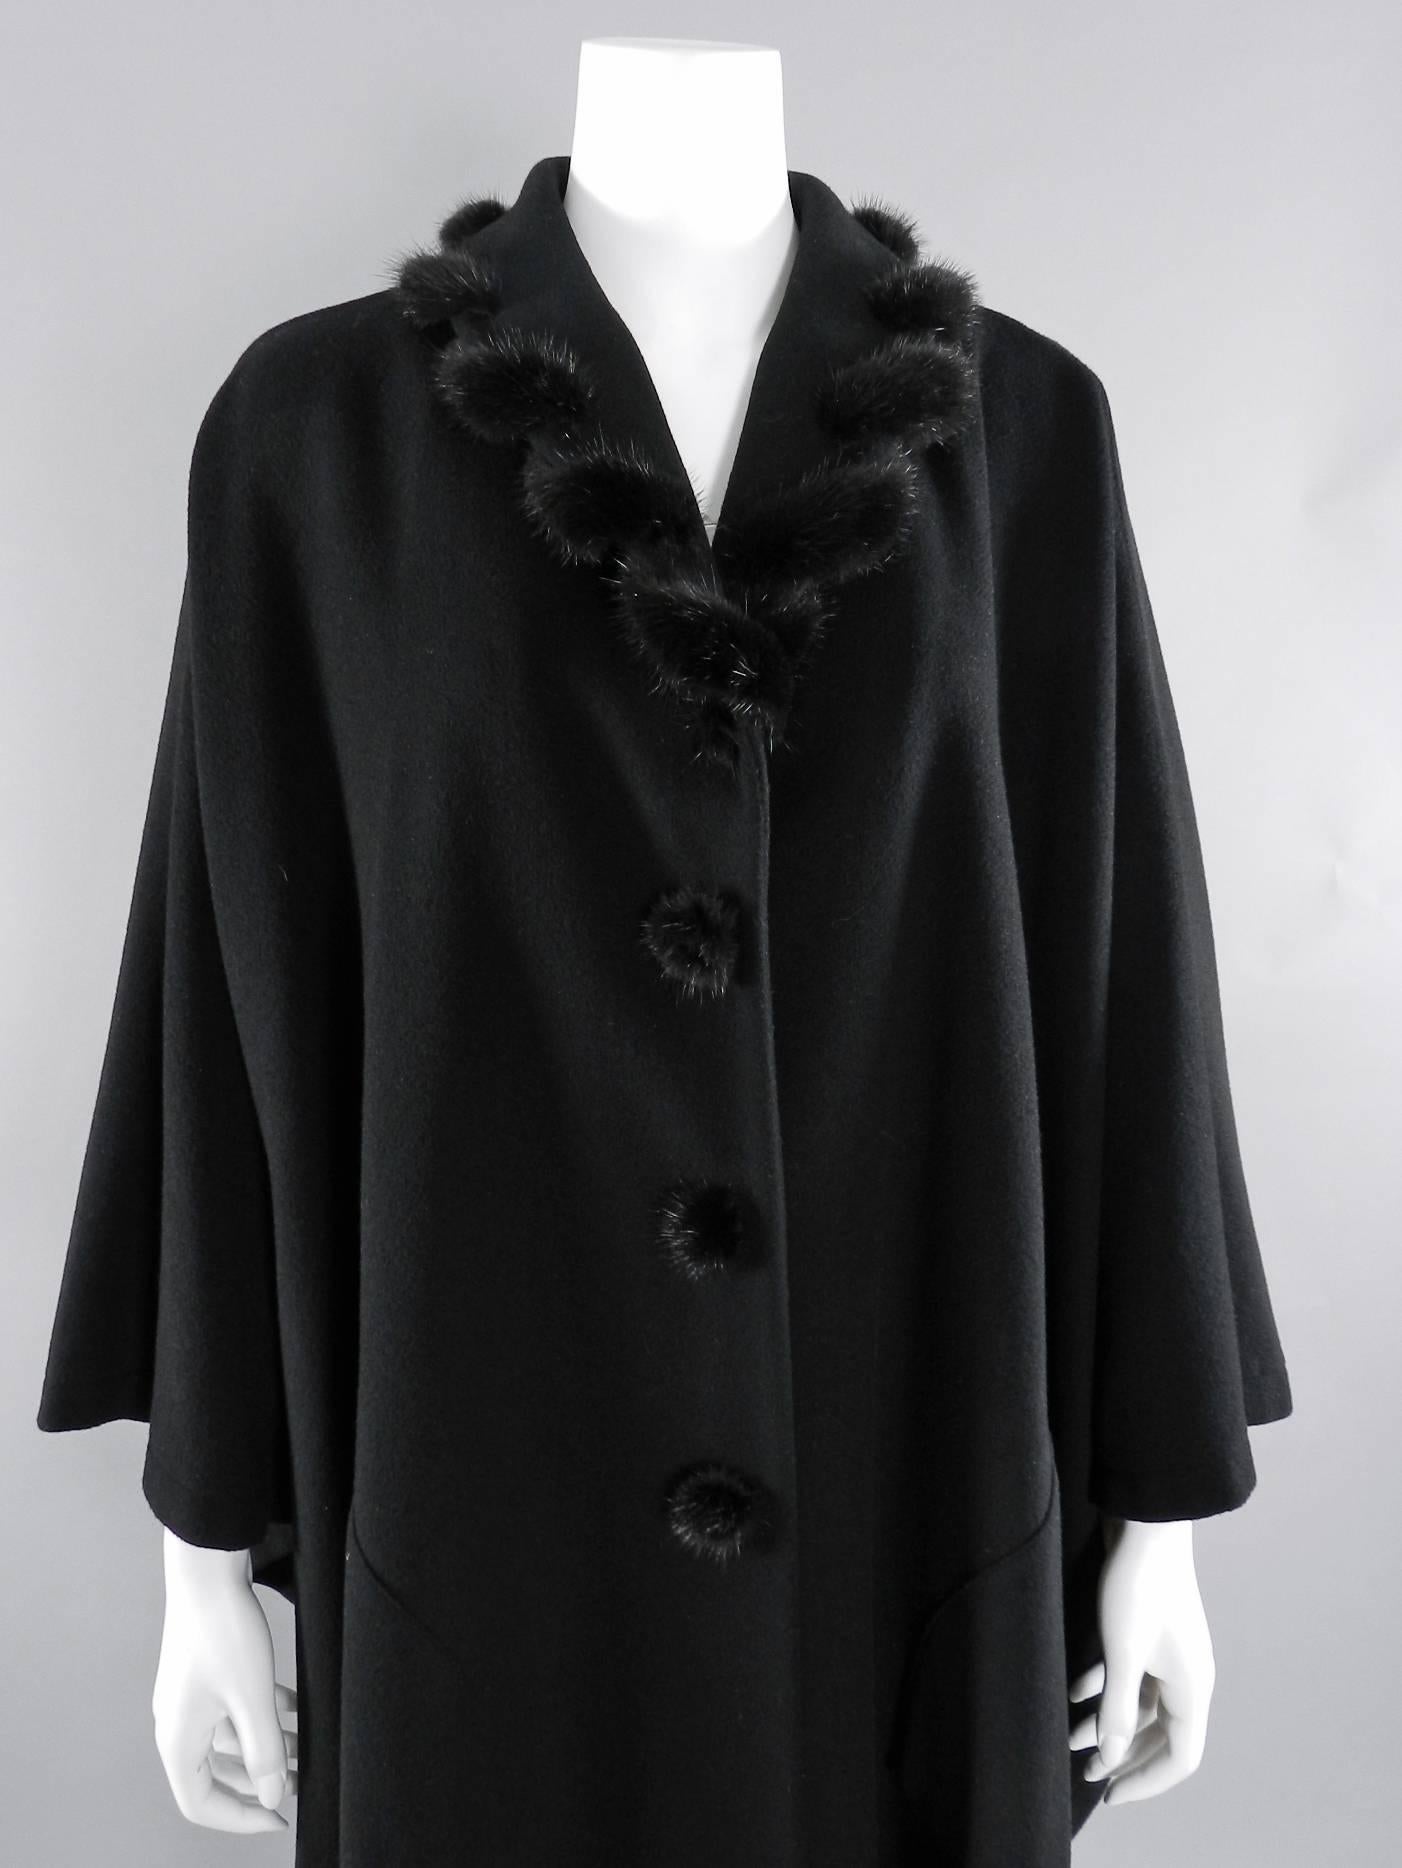 Givenchy Vintage Black Wool Cape with Mink Trim 1